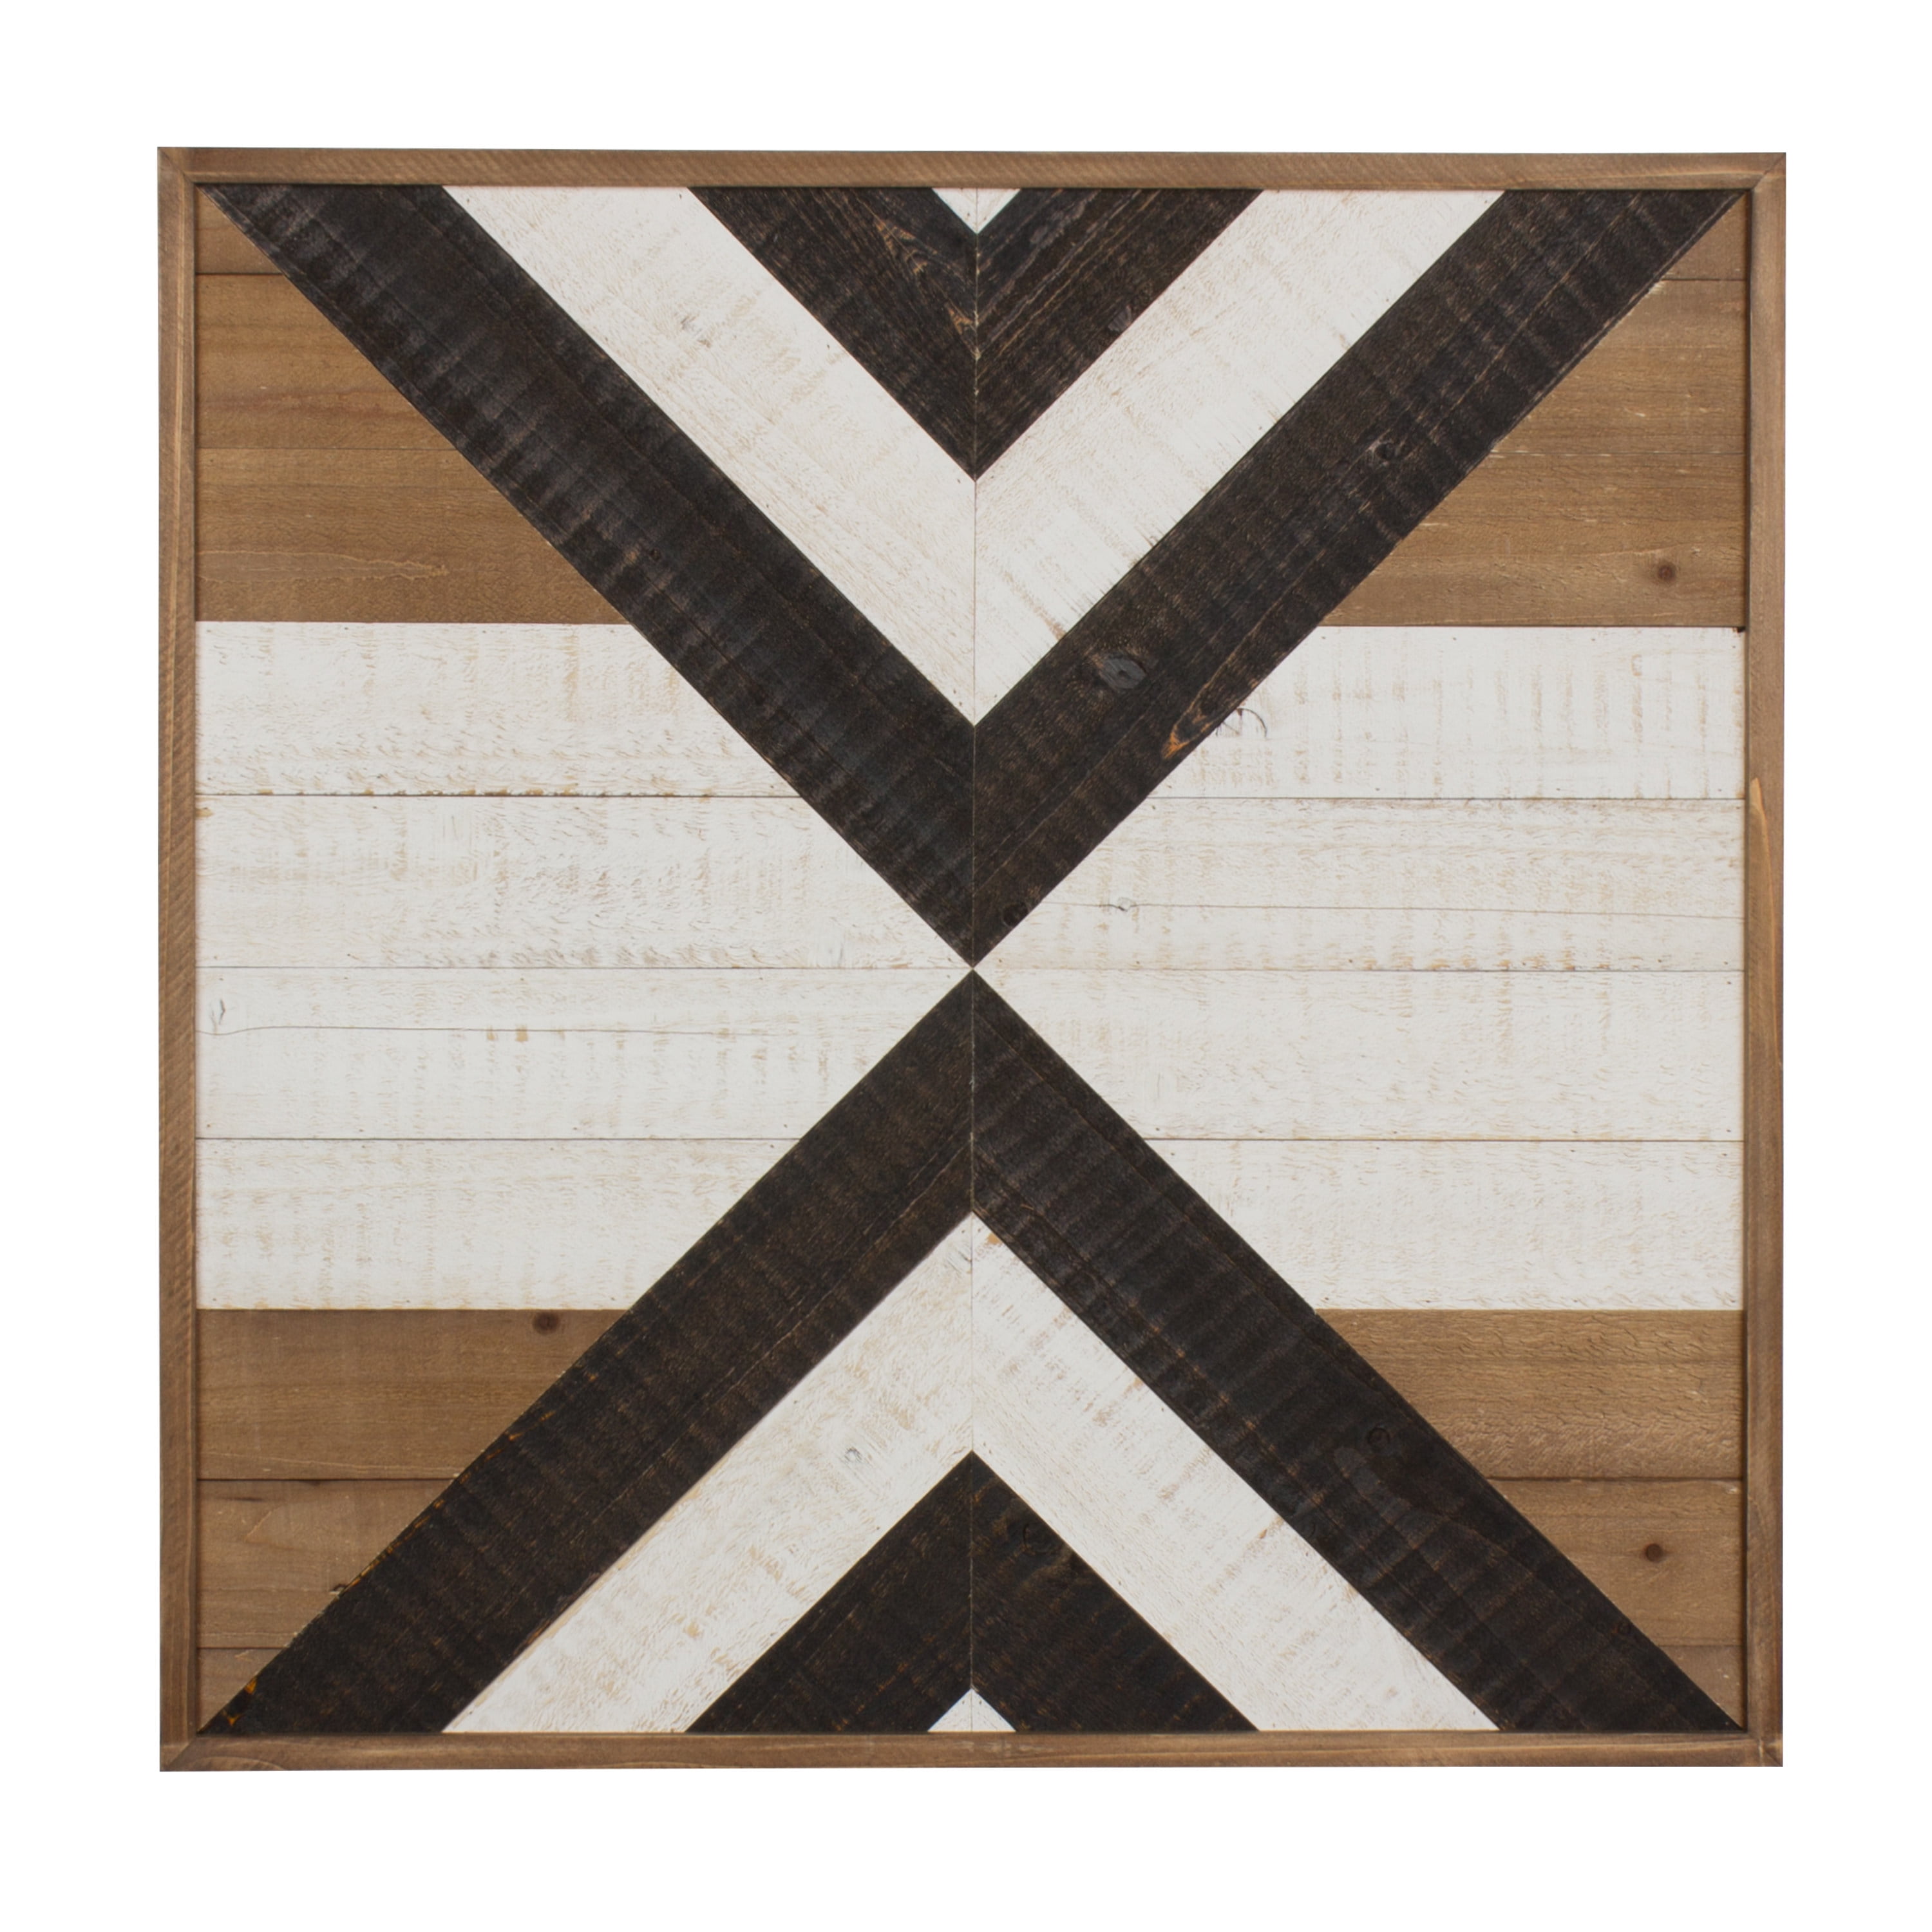 Kate and Laurel Baralt Shiplap Wood Plank Art, Black, White and Rustic Brown 